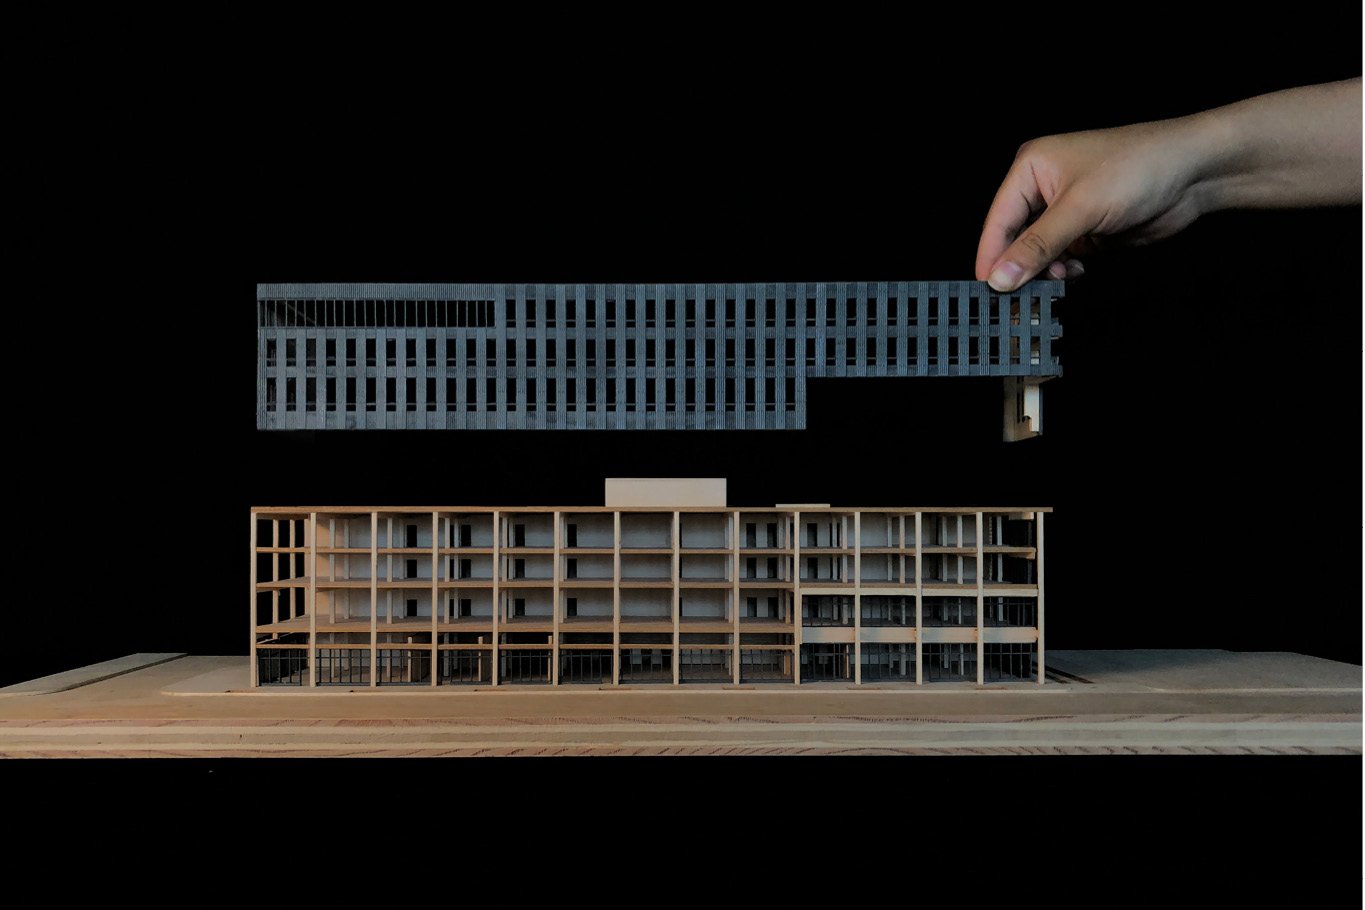 Physical Models in Architecture: Types and Benefits